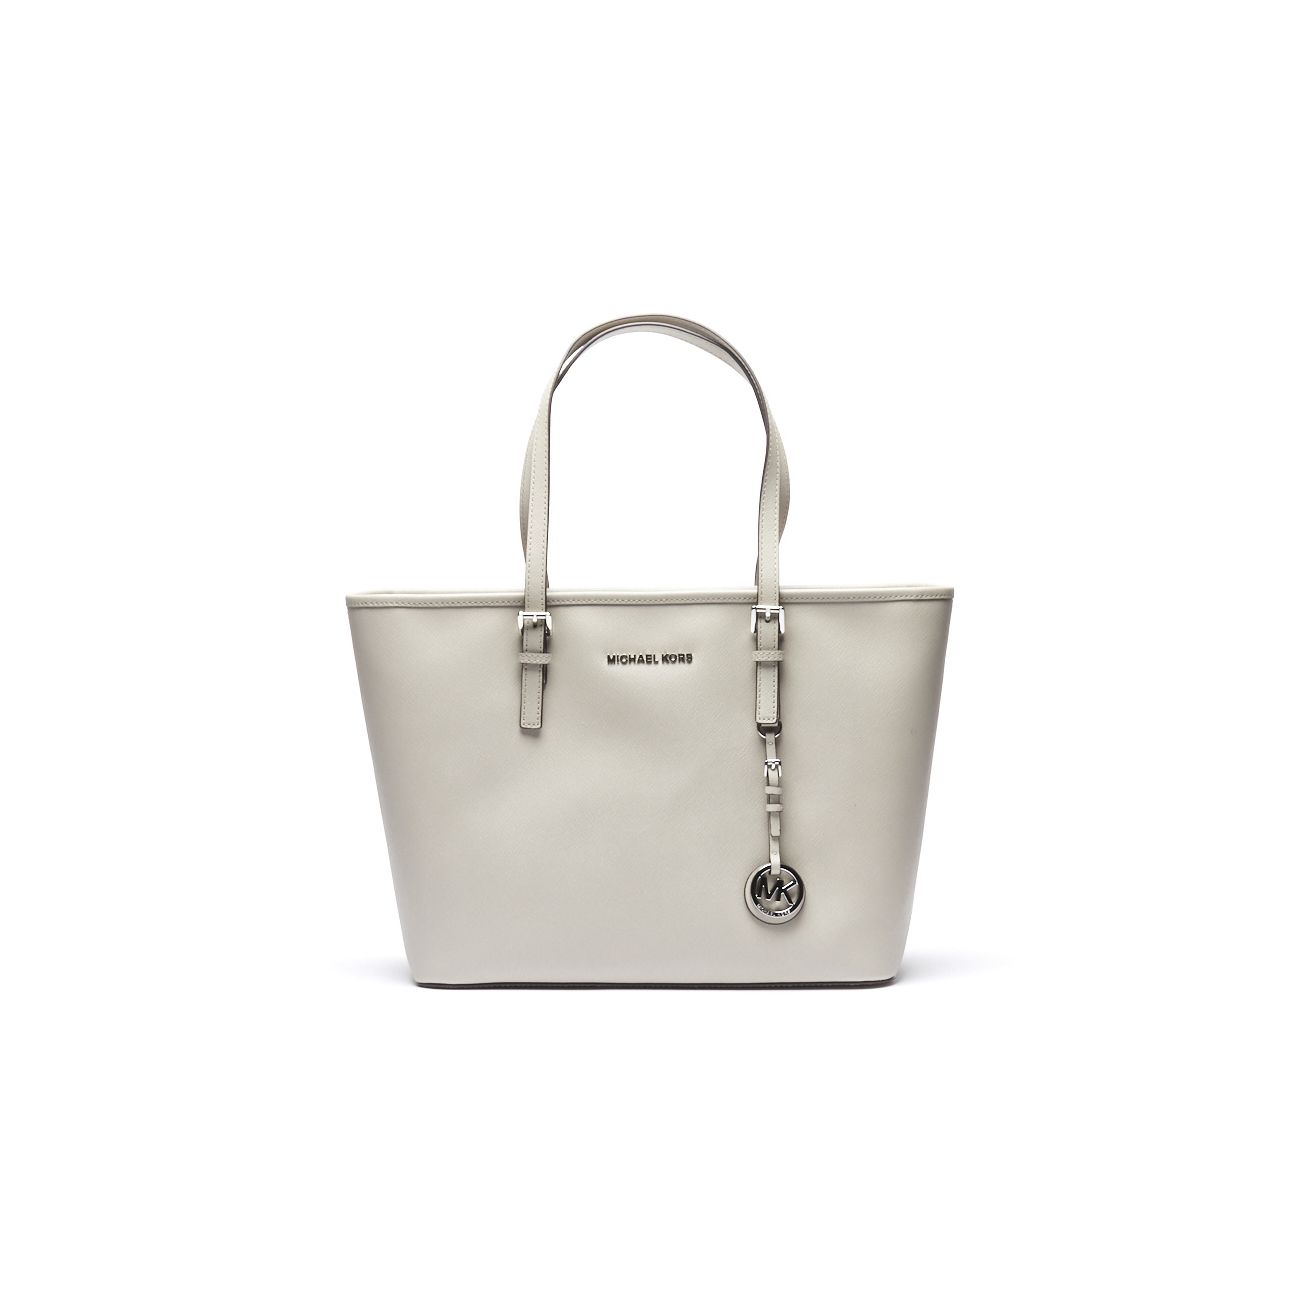 michael kors tote for Sale OFF 71%